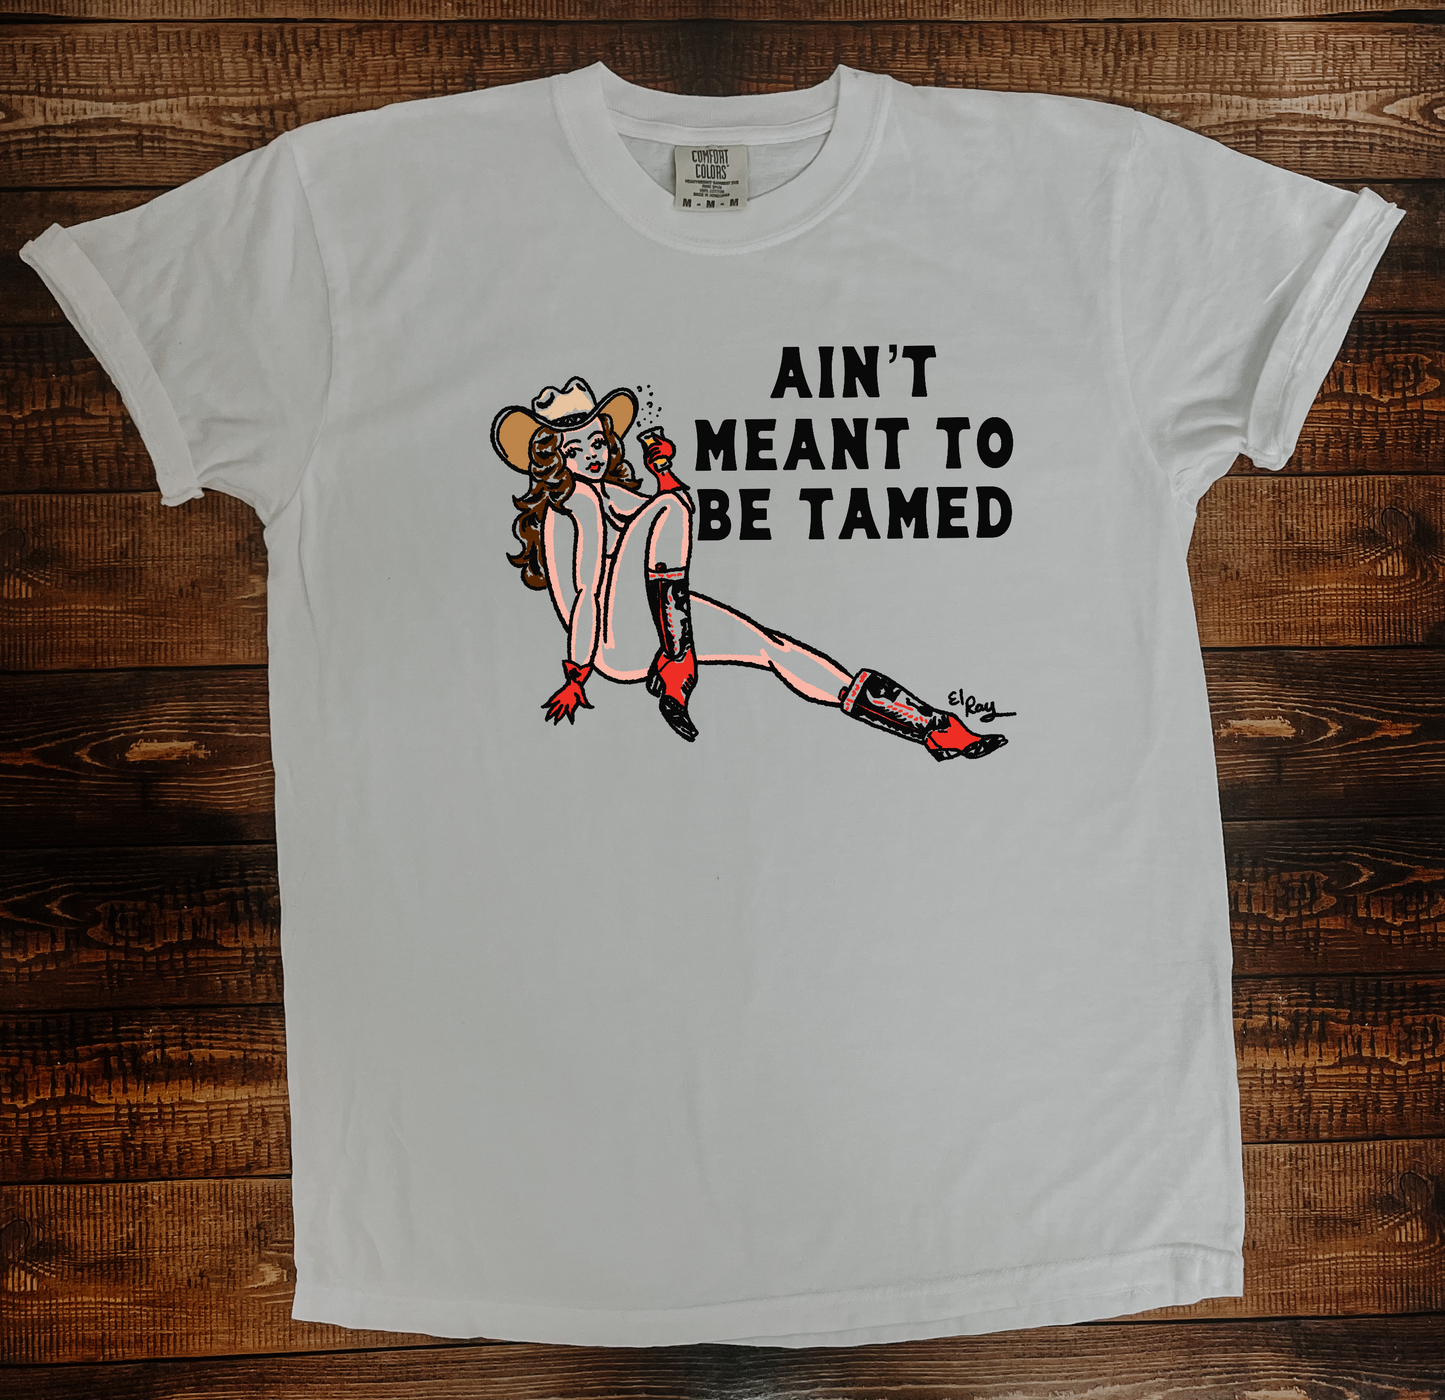 Ain’t meant to be tamed T Shirt